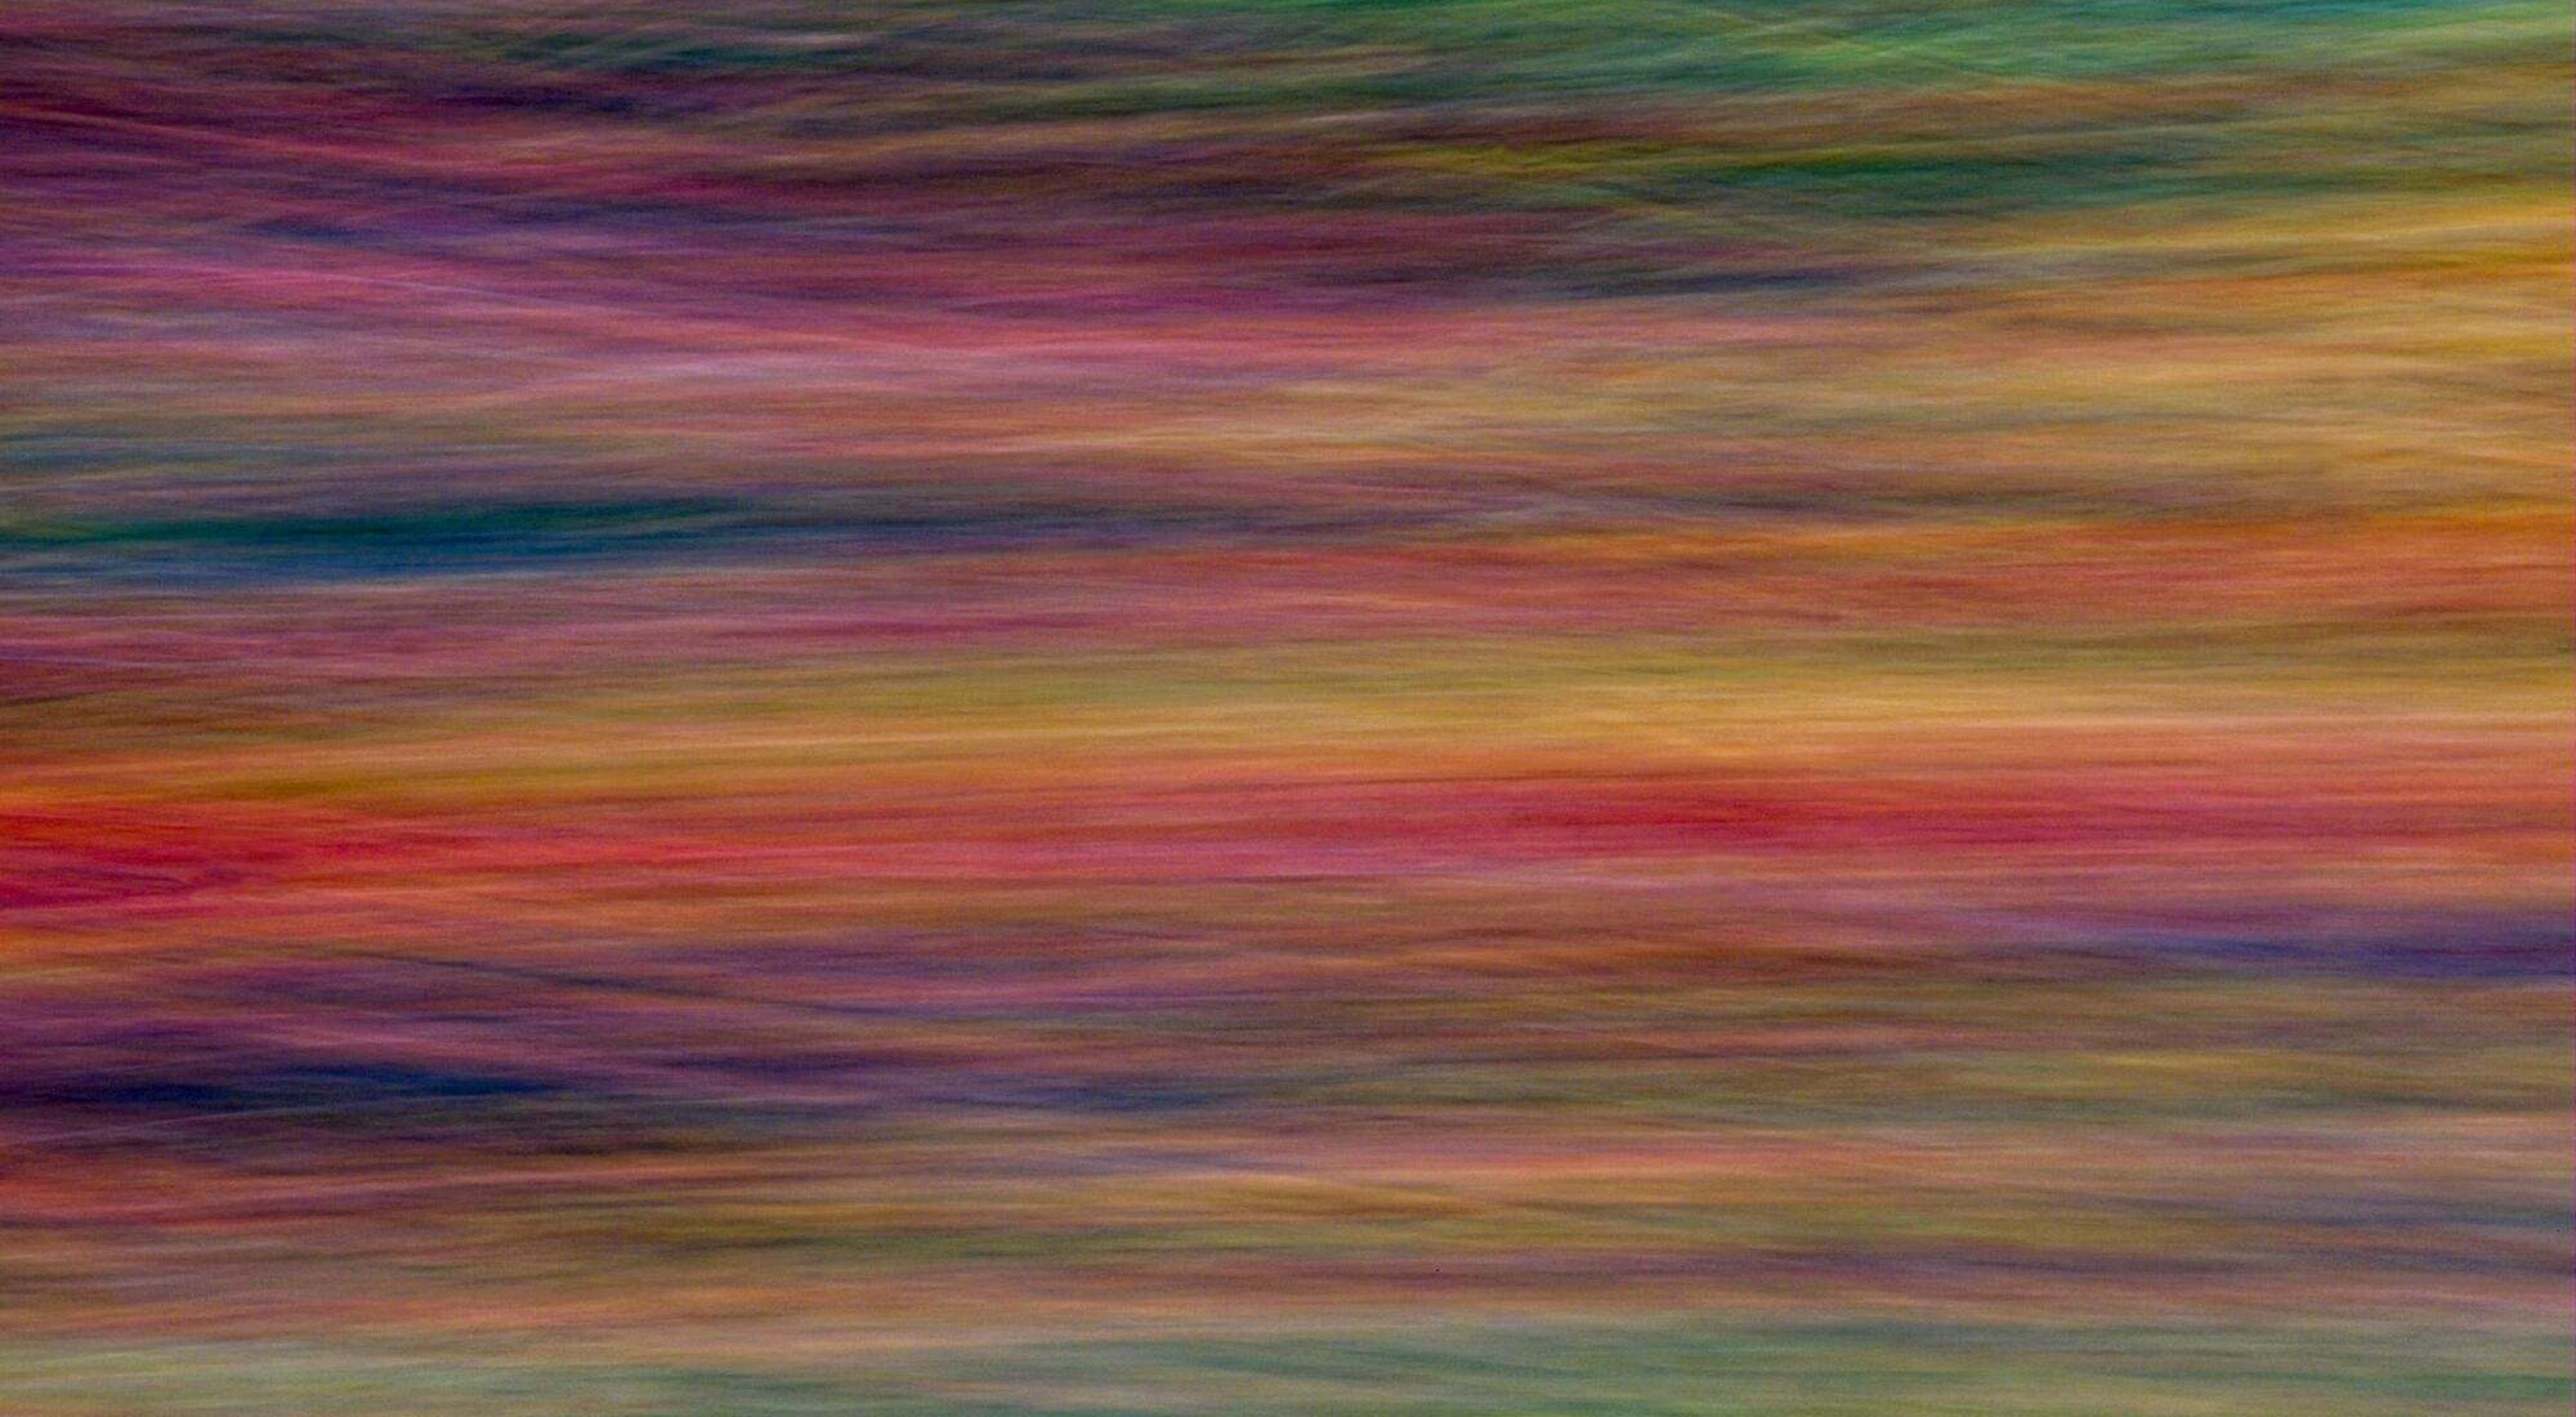 A horizontal blur of multiple colors.